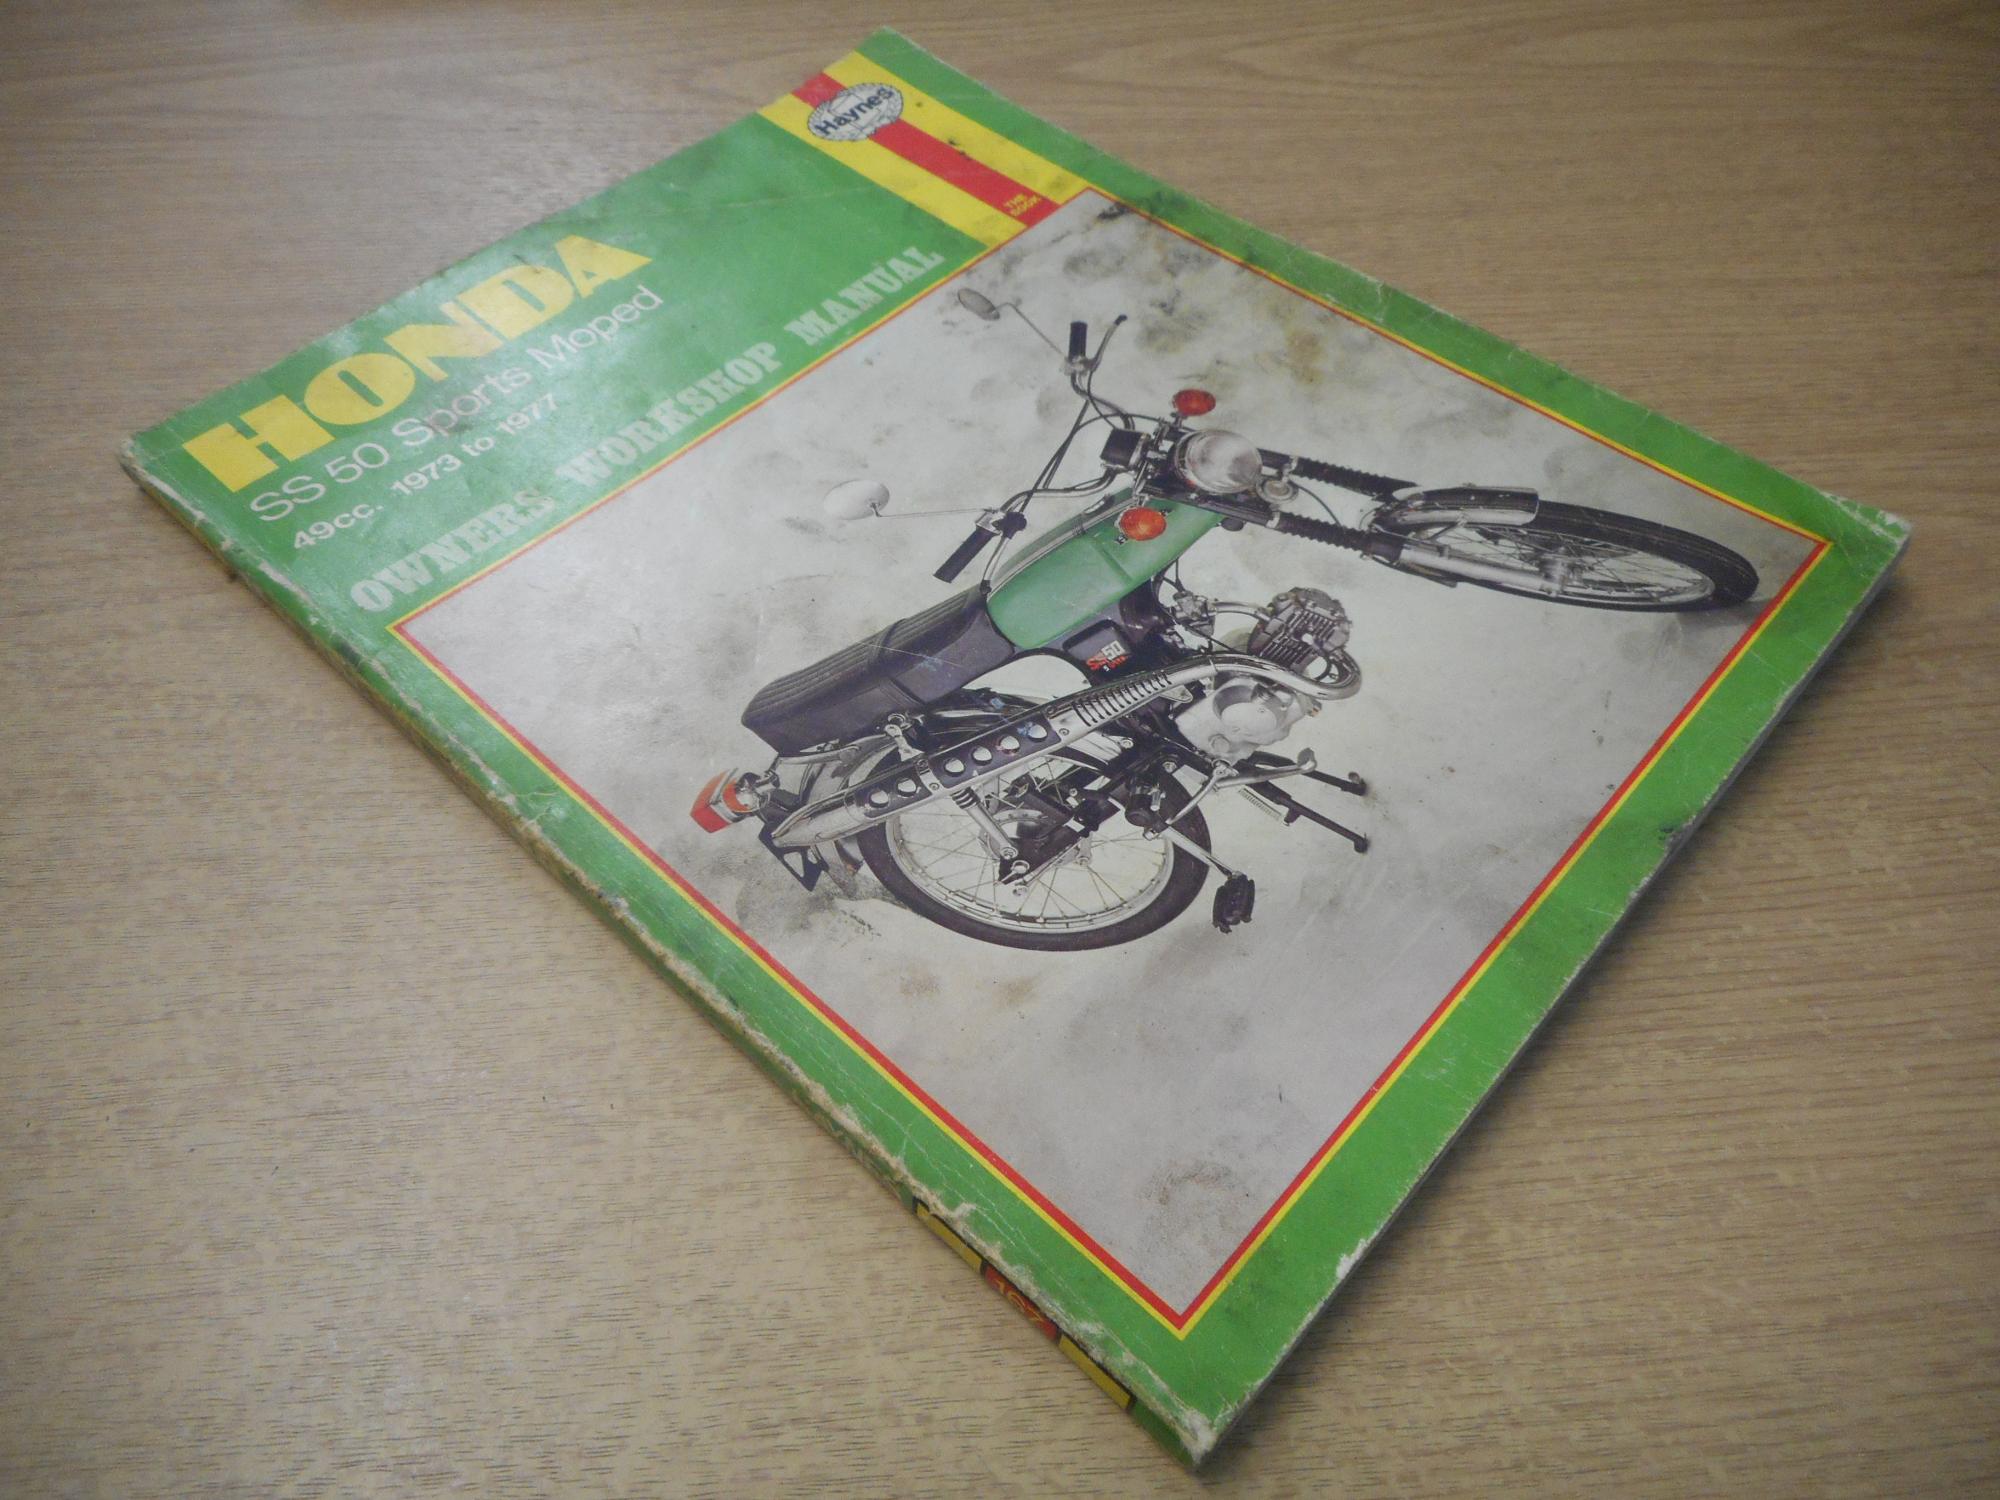 Honda SS50 Sports Moped Owner's Workshop Manual (Haynes owners workshop manuals for motorcycles)